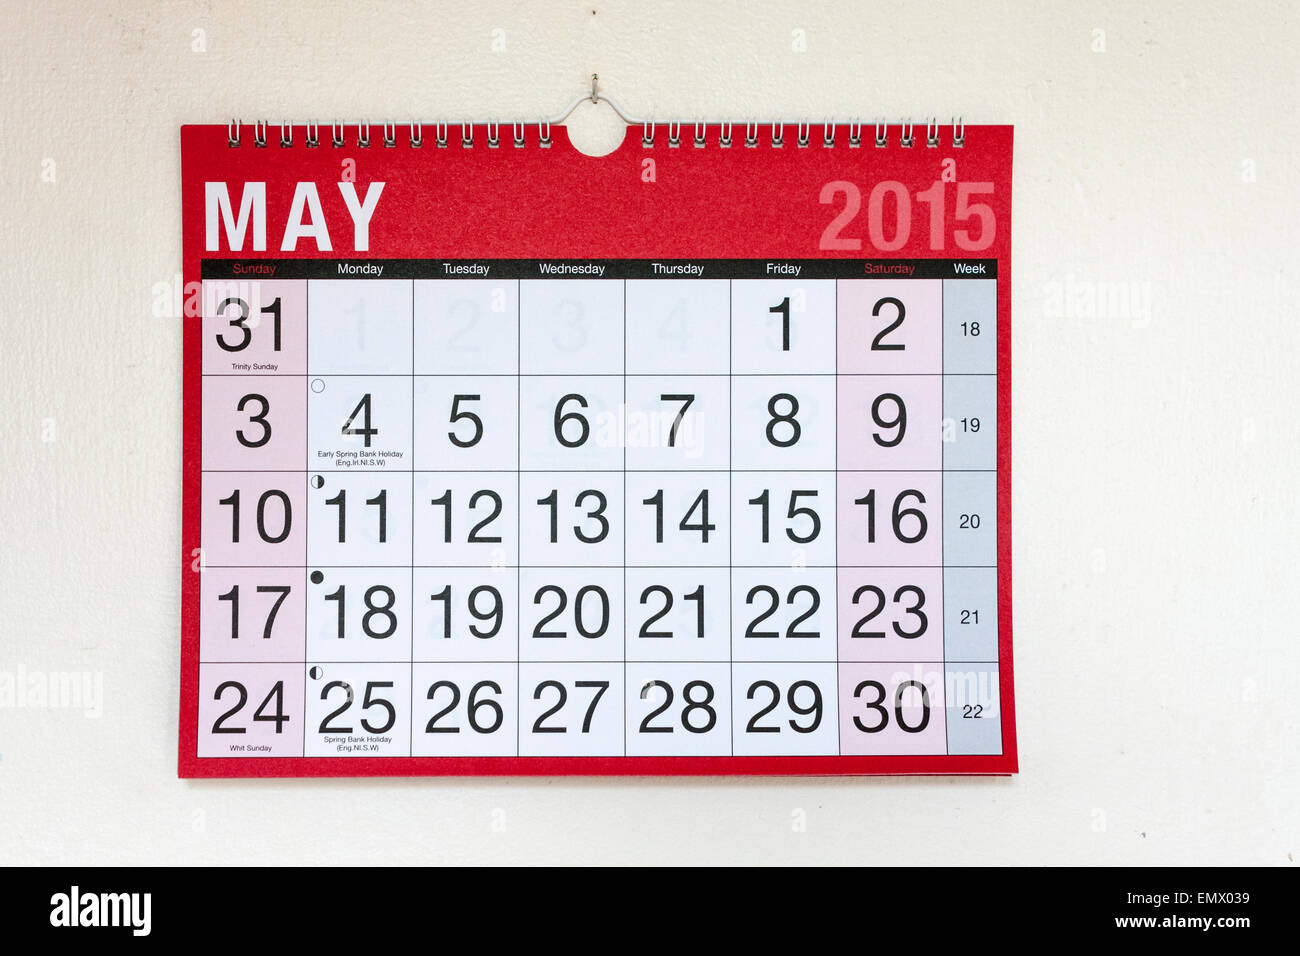 Wall calendar for month of May 2015 Stock Photo